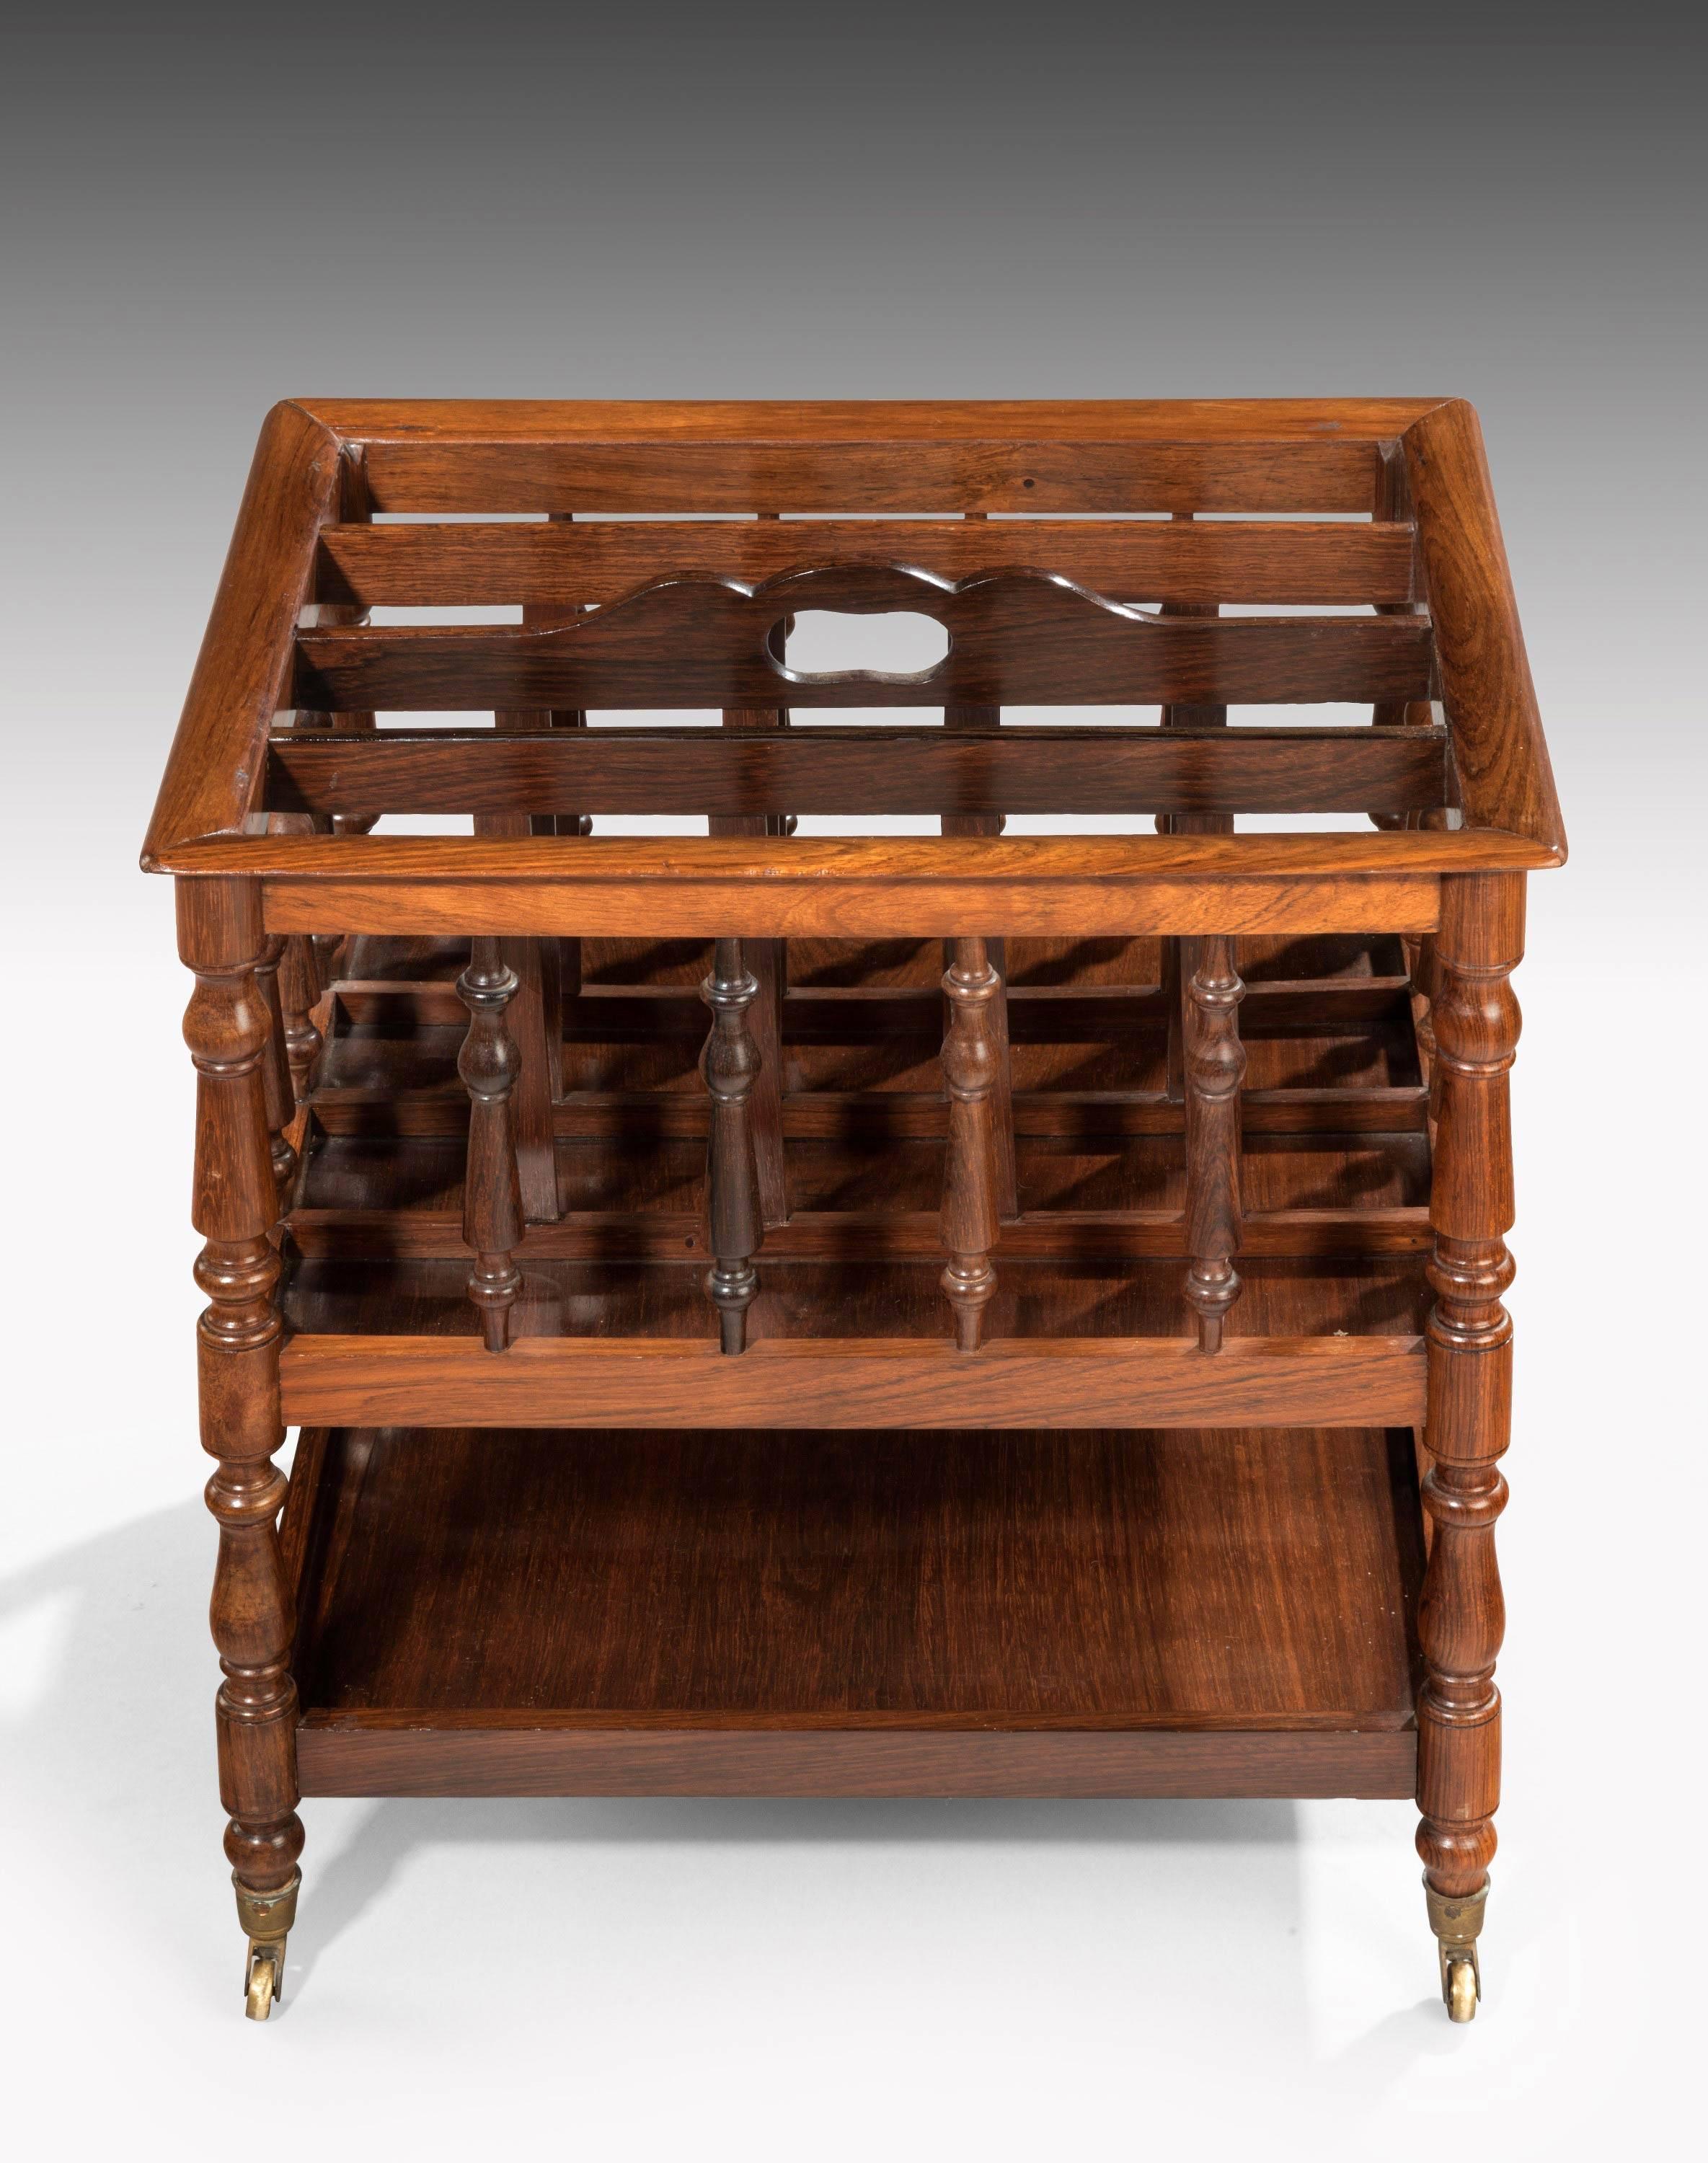 A unusual late Regency period Canterbury / single tier étagère. Well figured timbers and particularly good spindles to the uprights.